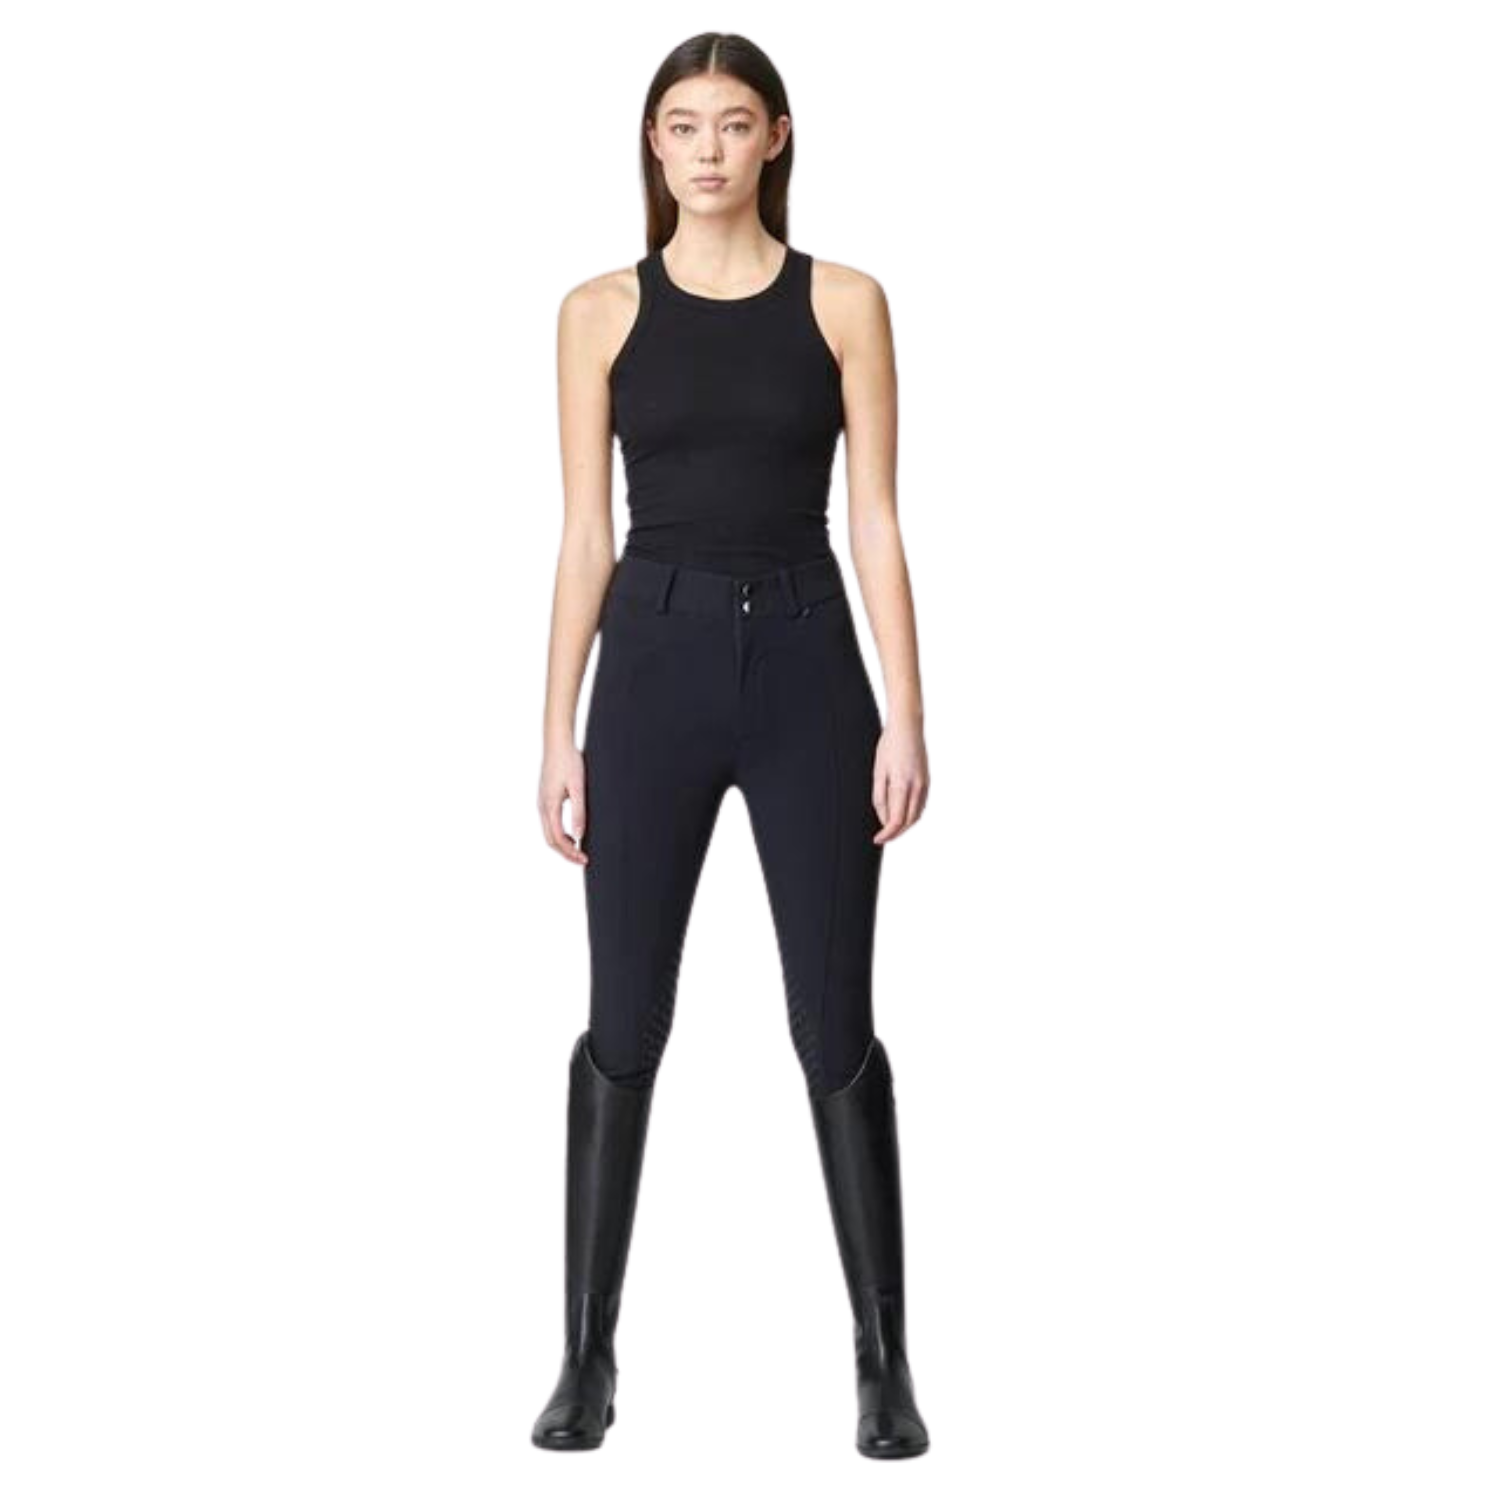 Ladies Extra High-Rise Compression Knee Grip Breeches - Black